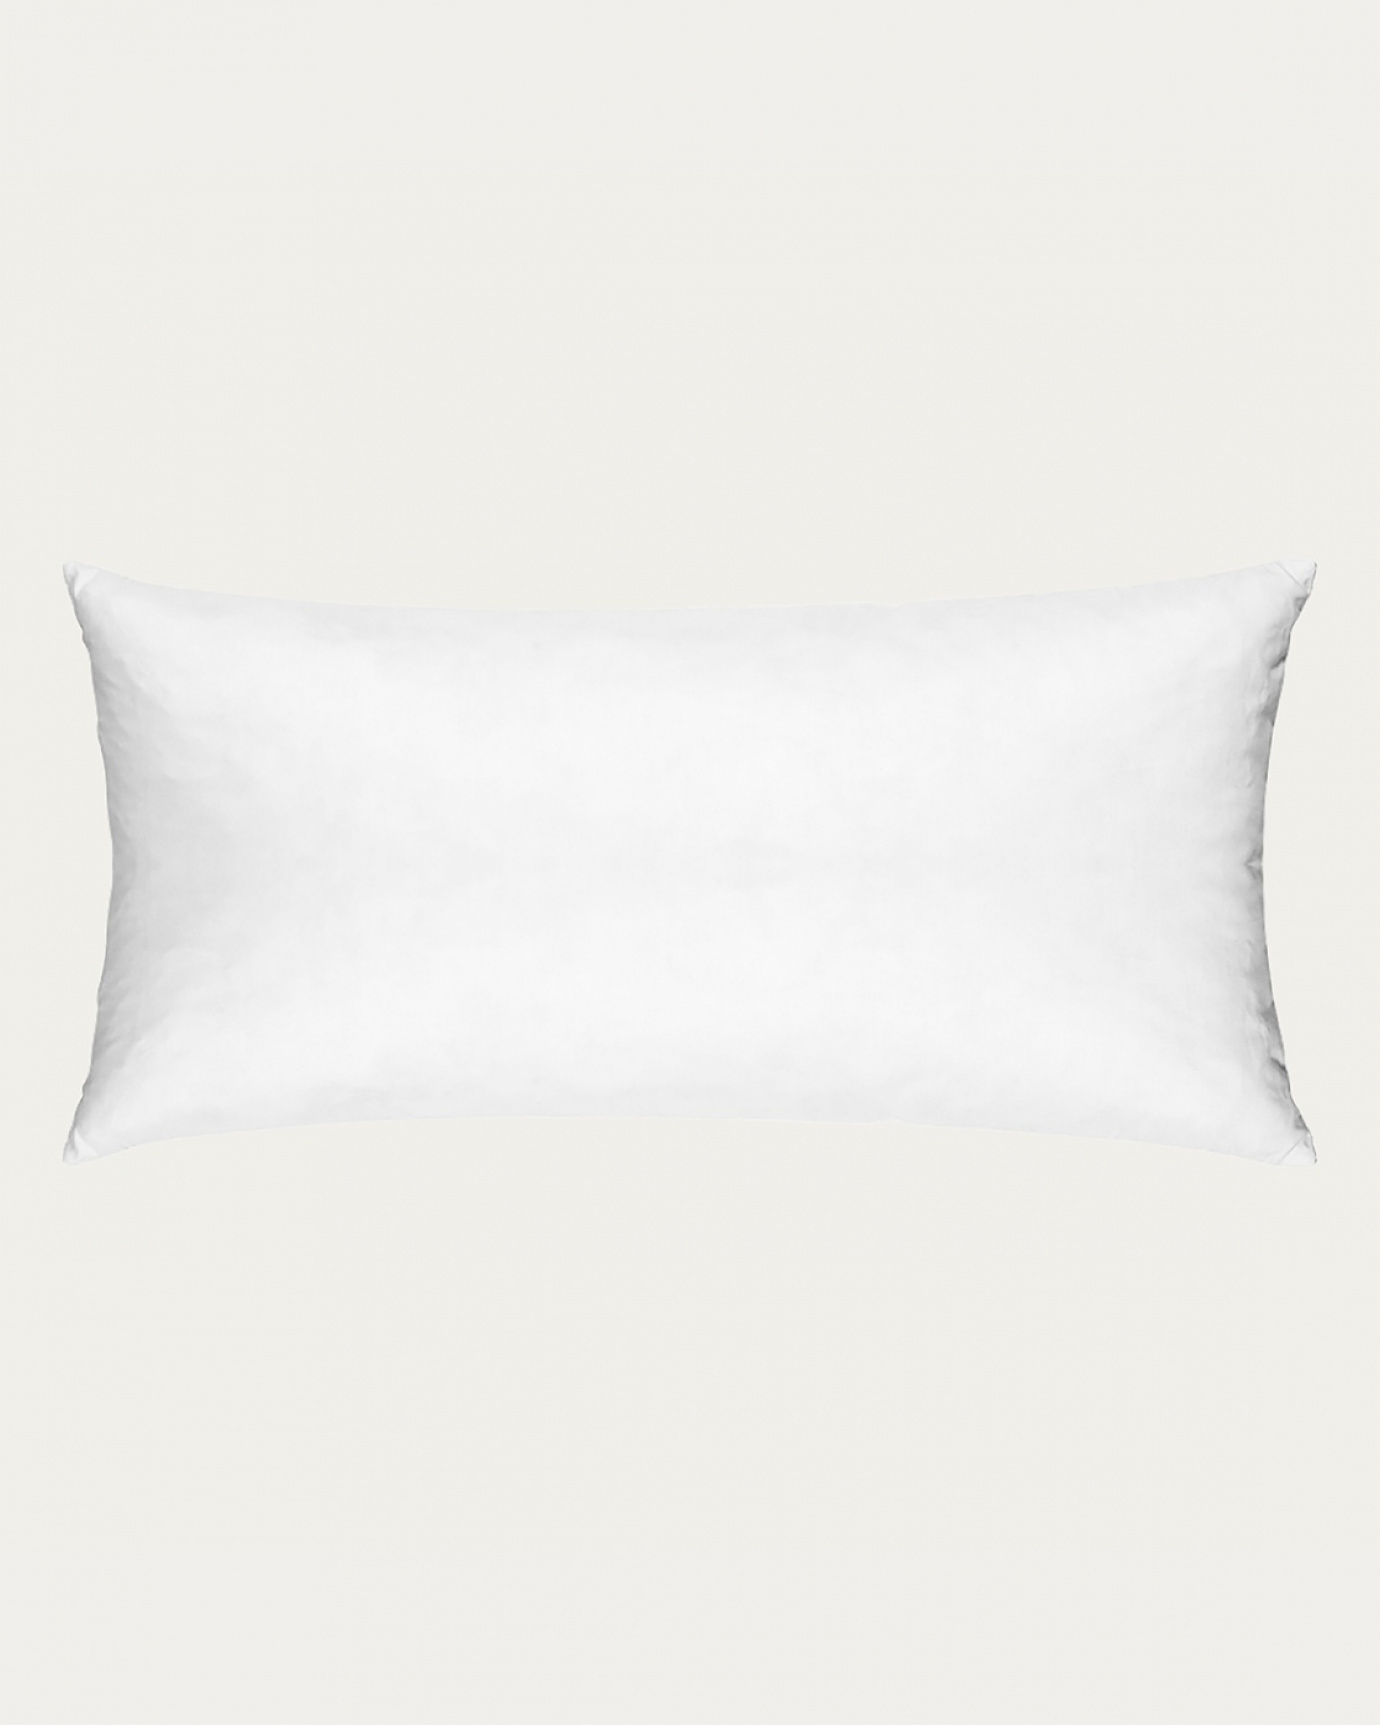 Product image white SYNTHETIC cushion insert made of cotton with polyester filling from LINUM DESIGN. Size 35x70 cm.